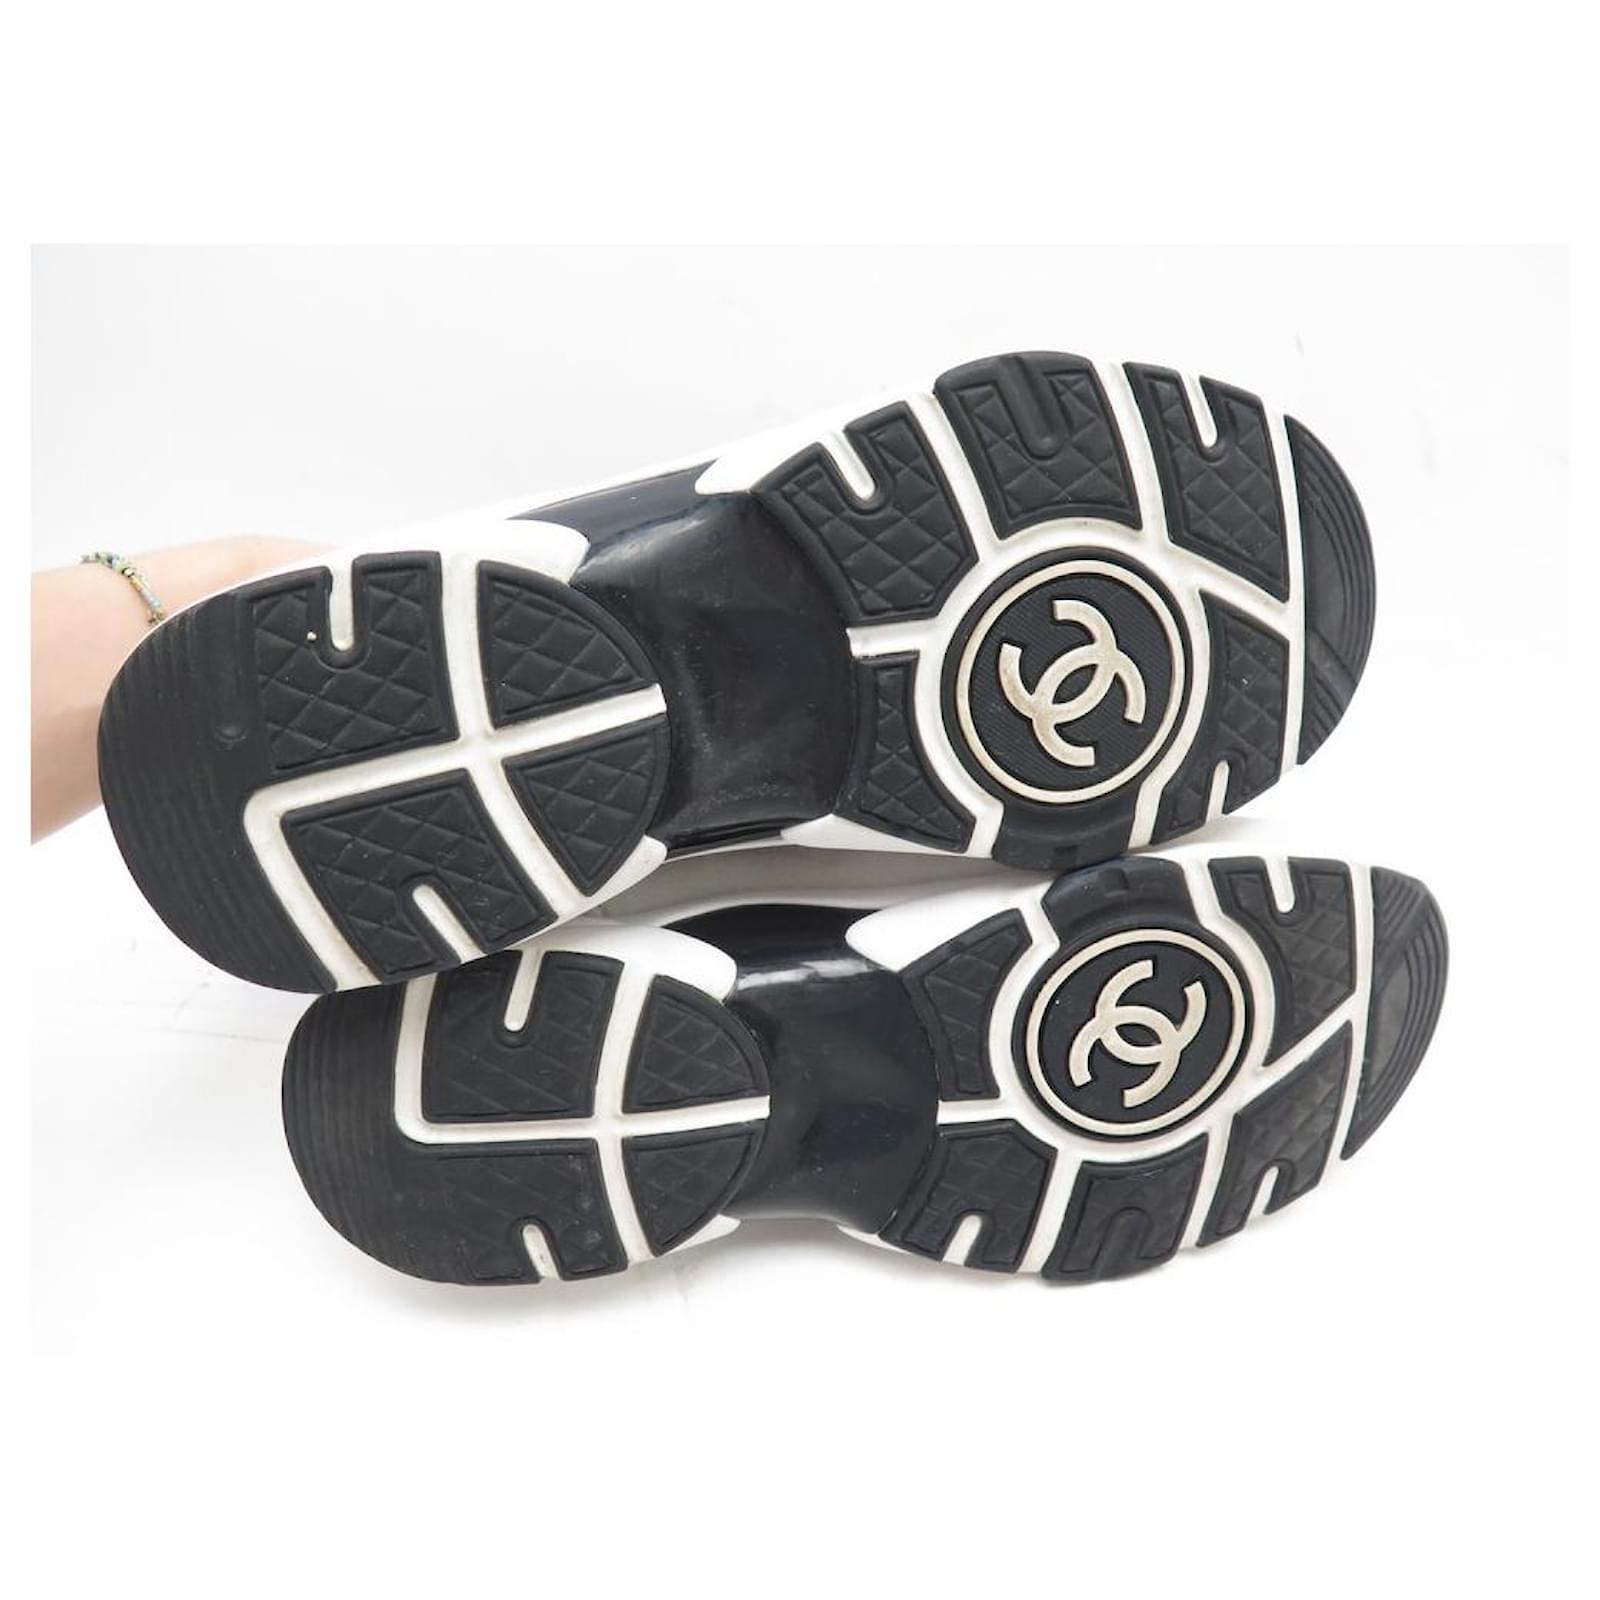 CHANEL SNEAKERS LOGO CC LOW TOP G33743 36 SNEAKERS SHOES